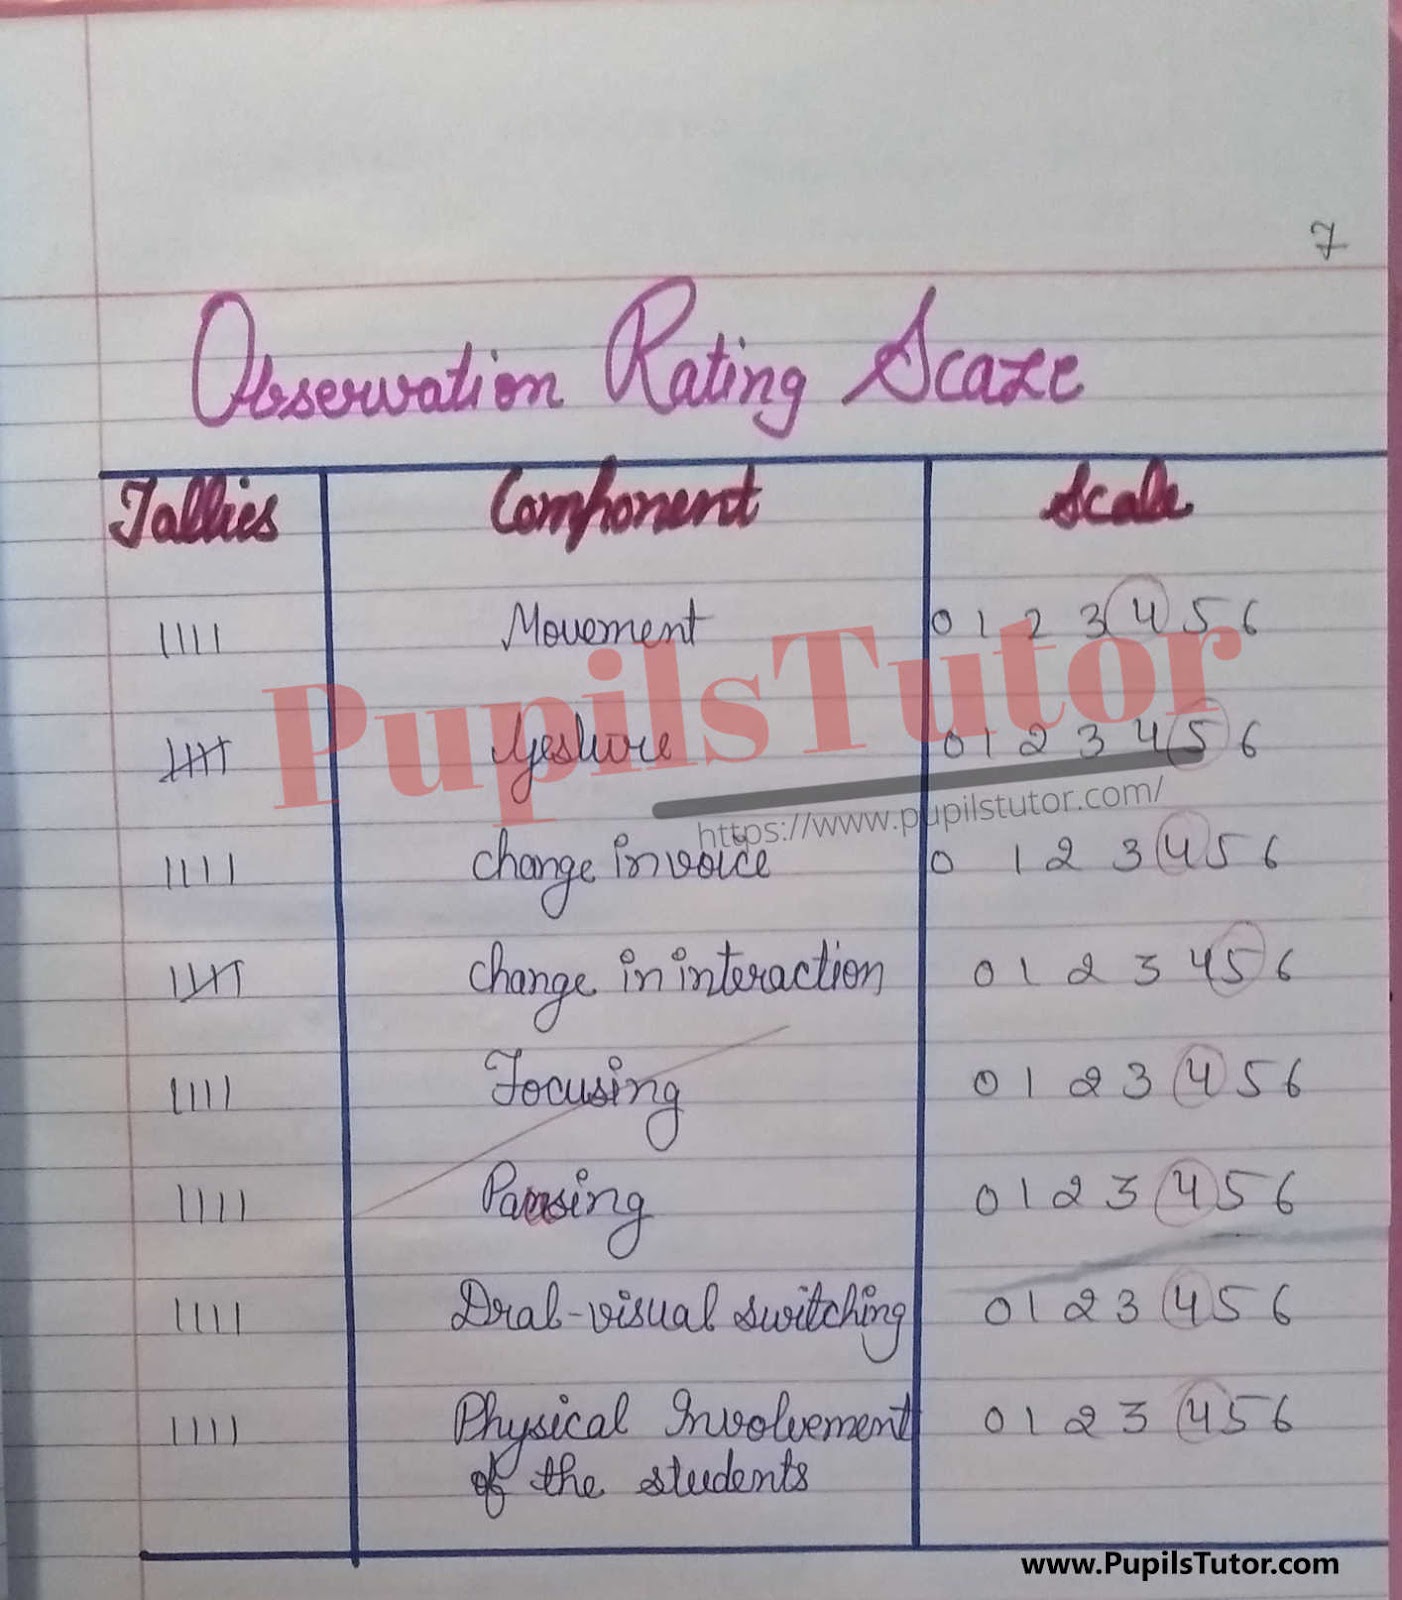 Chemistry Lesson Plan On Chemical Bonding For Class/Grade 9 For CBSE NCERT School And College Teachers  – (Page And Image Number 3) – www.pupilstutor.com